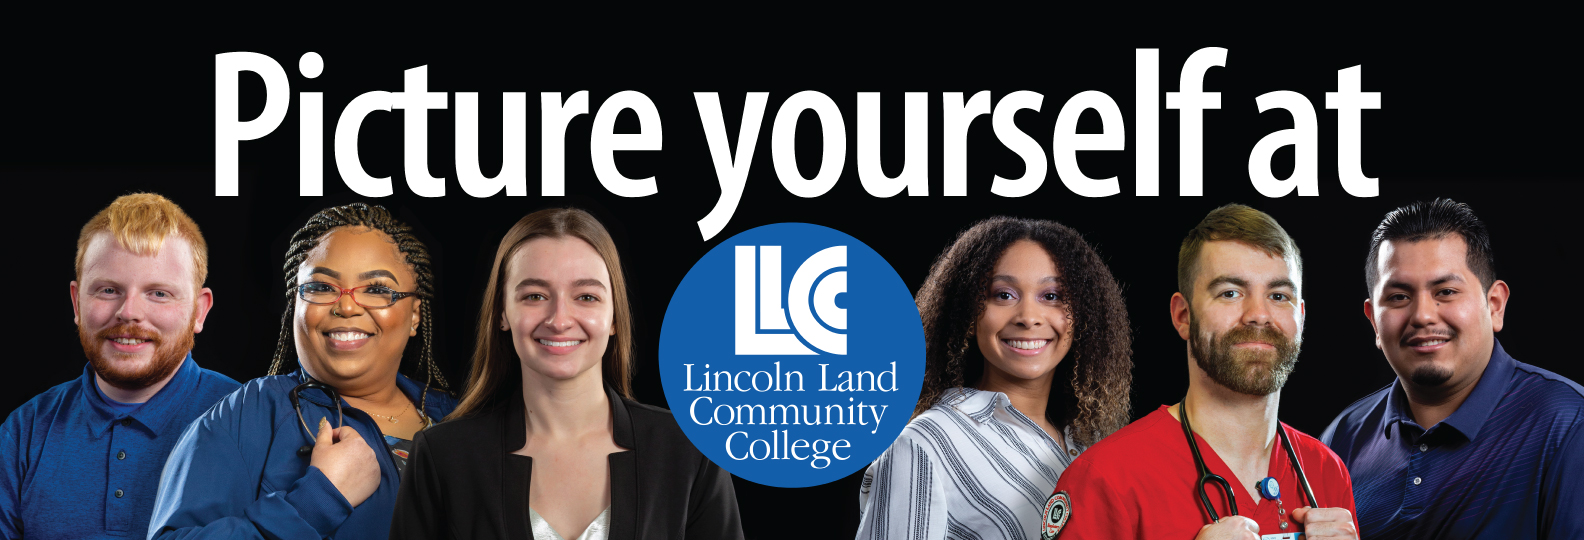 Picture yourself at LLCC Lincoln Land Community College